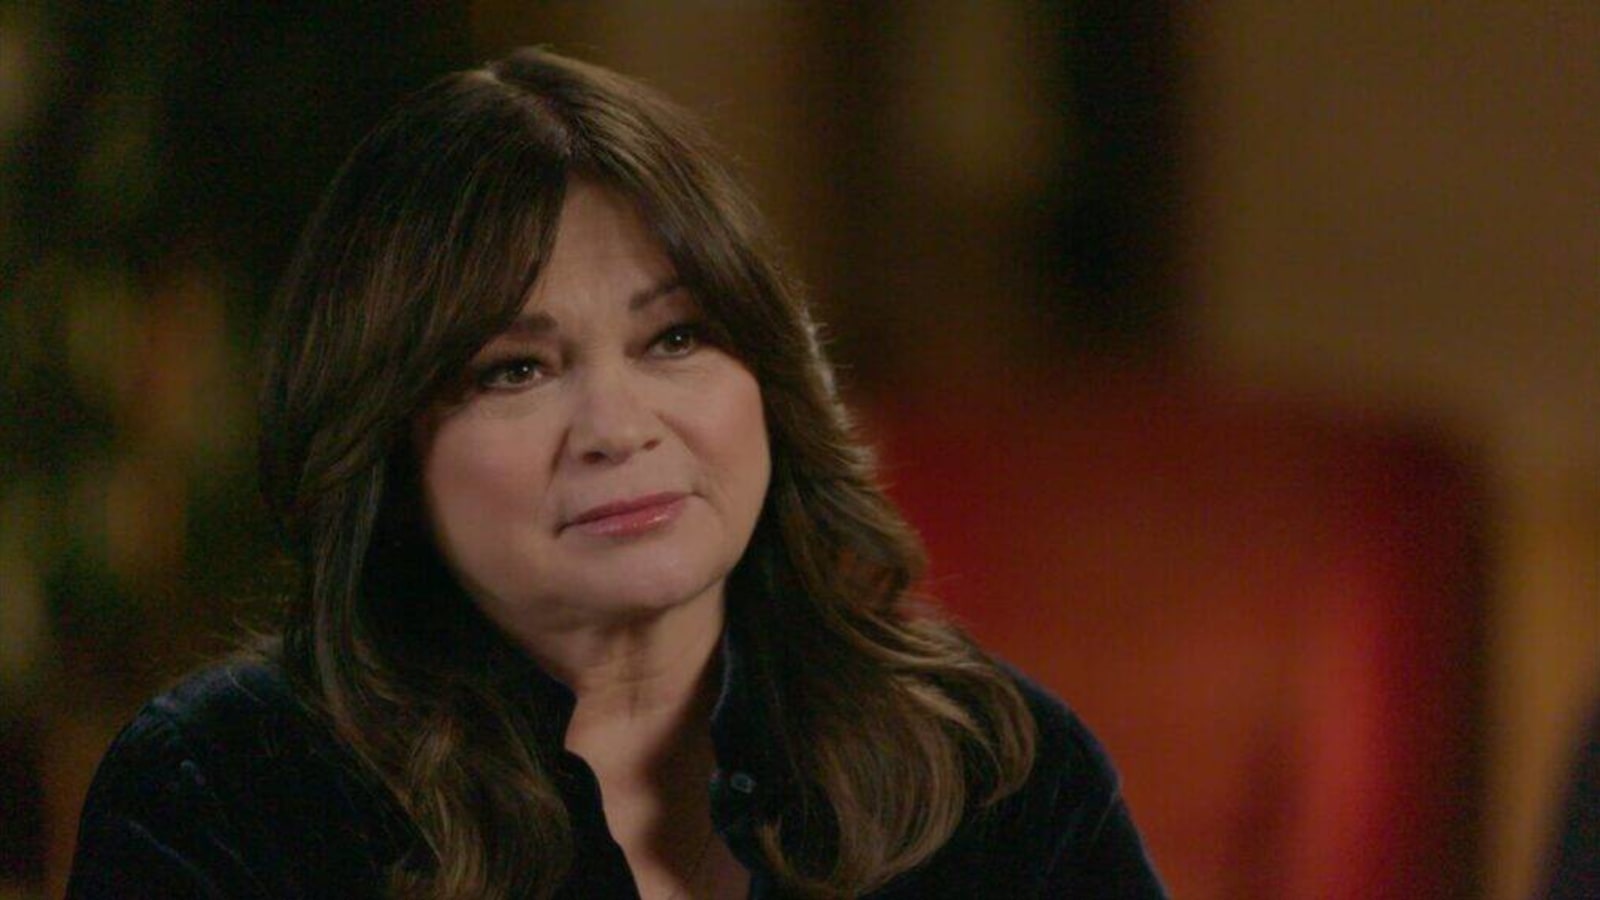 ‘Finding Your Roots’ Trailer: Valerie Bertinelli Learns Shocking Family Secret (Video)